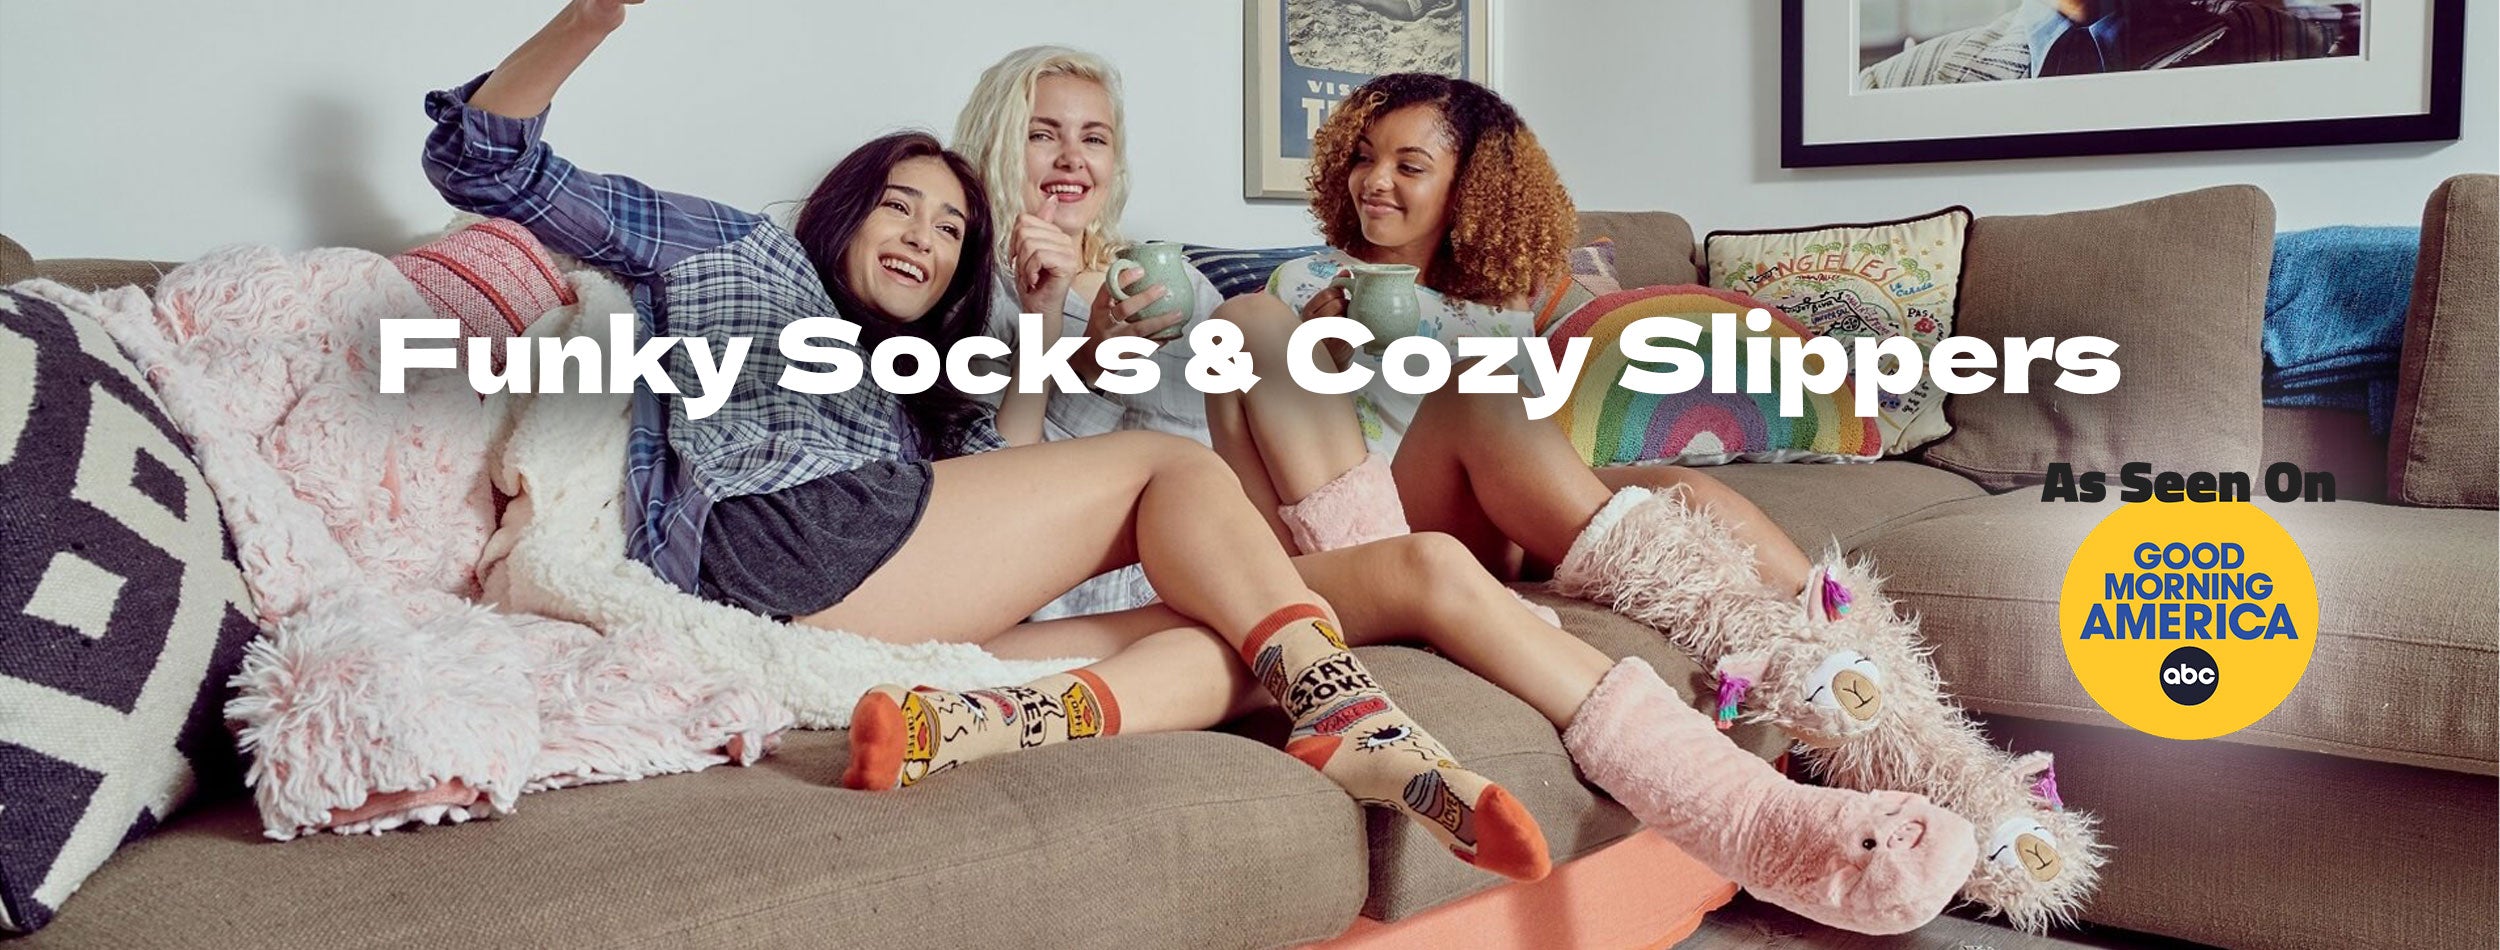 Fun, Funny, funky novelty socks and slippers